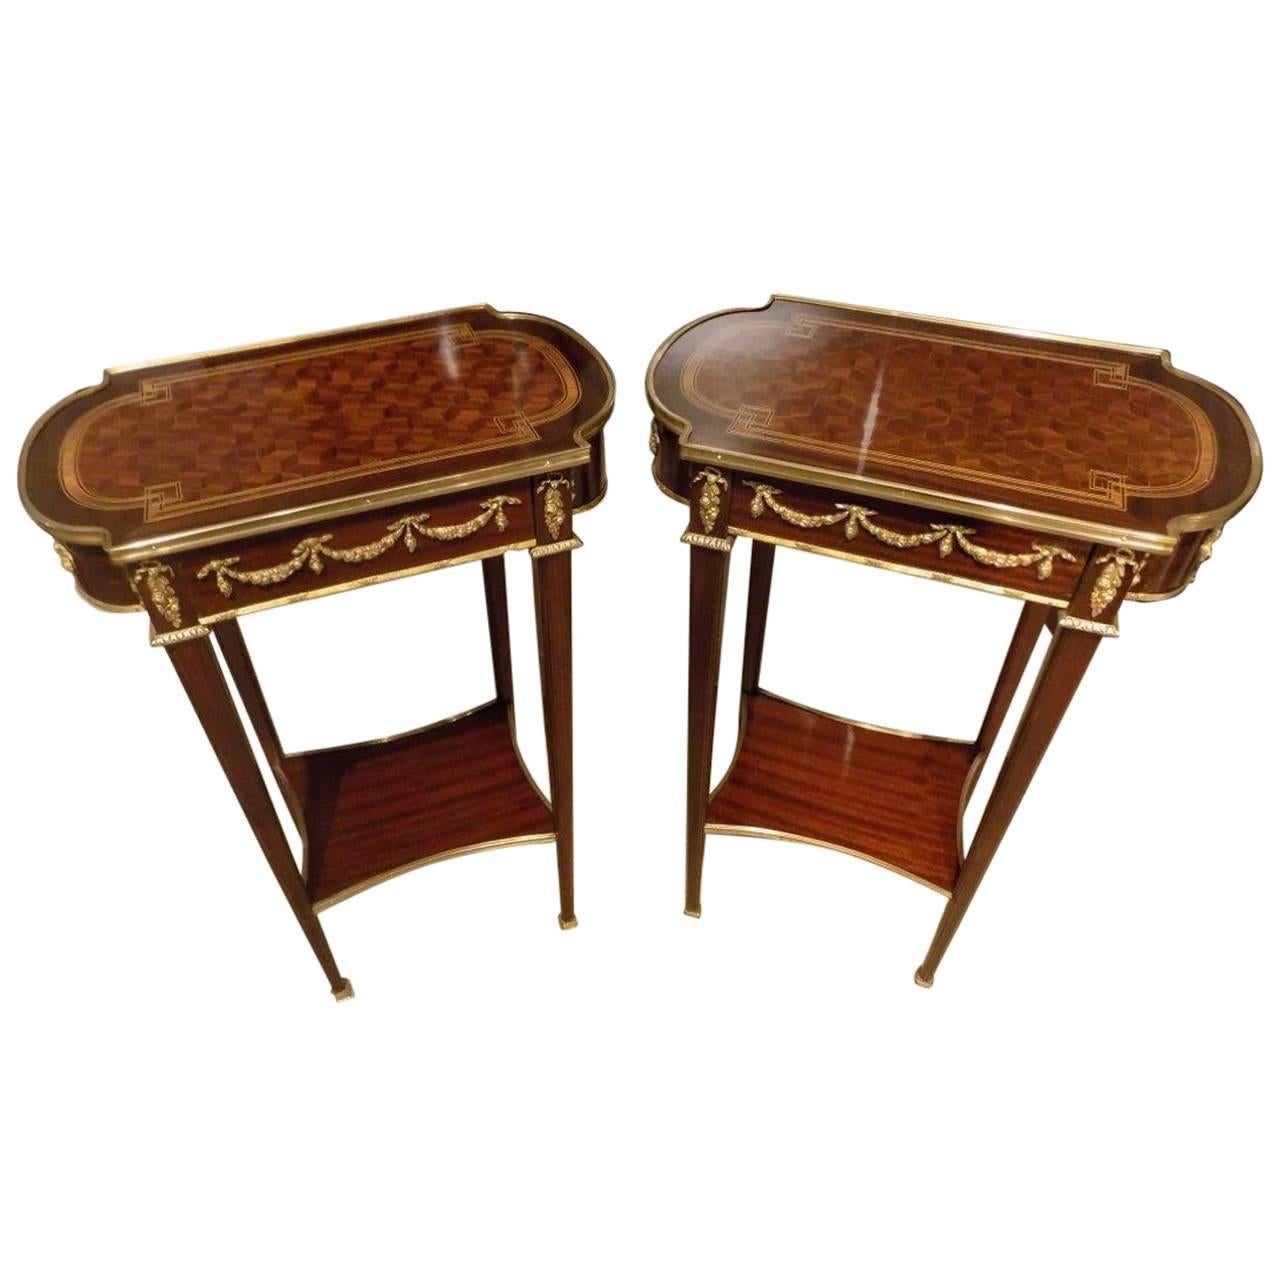 Pair of French Mahogany, Kingwood and Parquetry Inlaid Side Tables